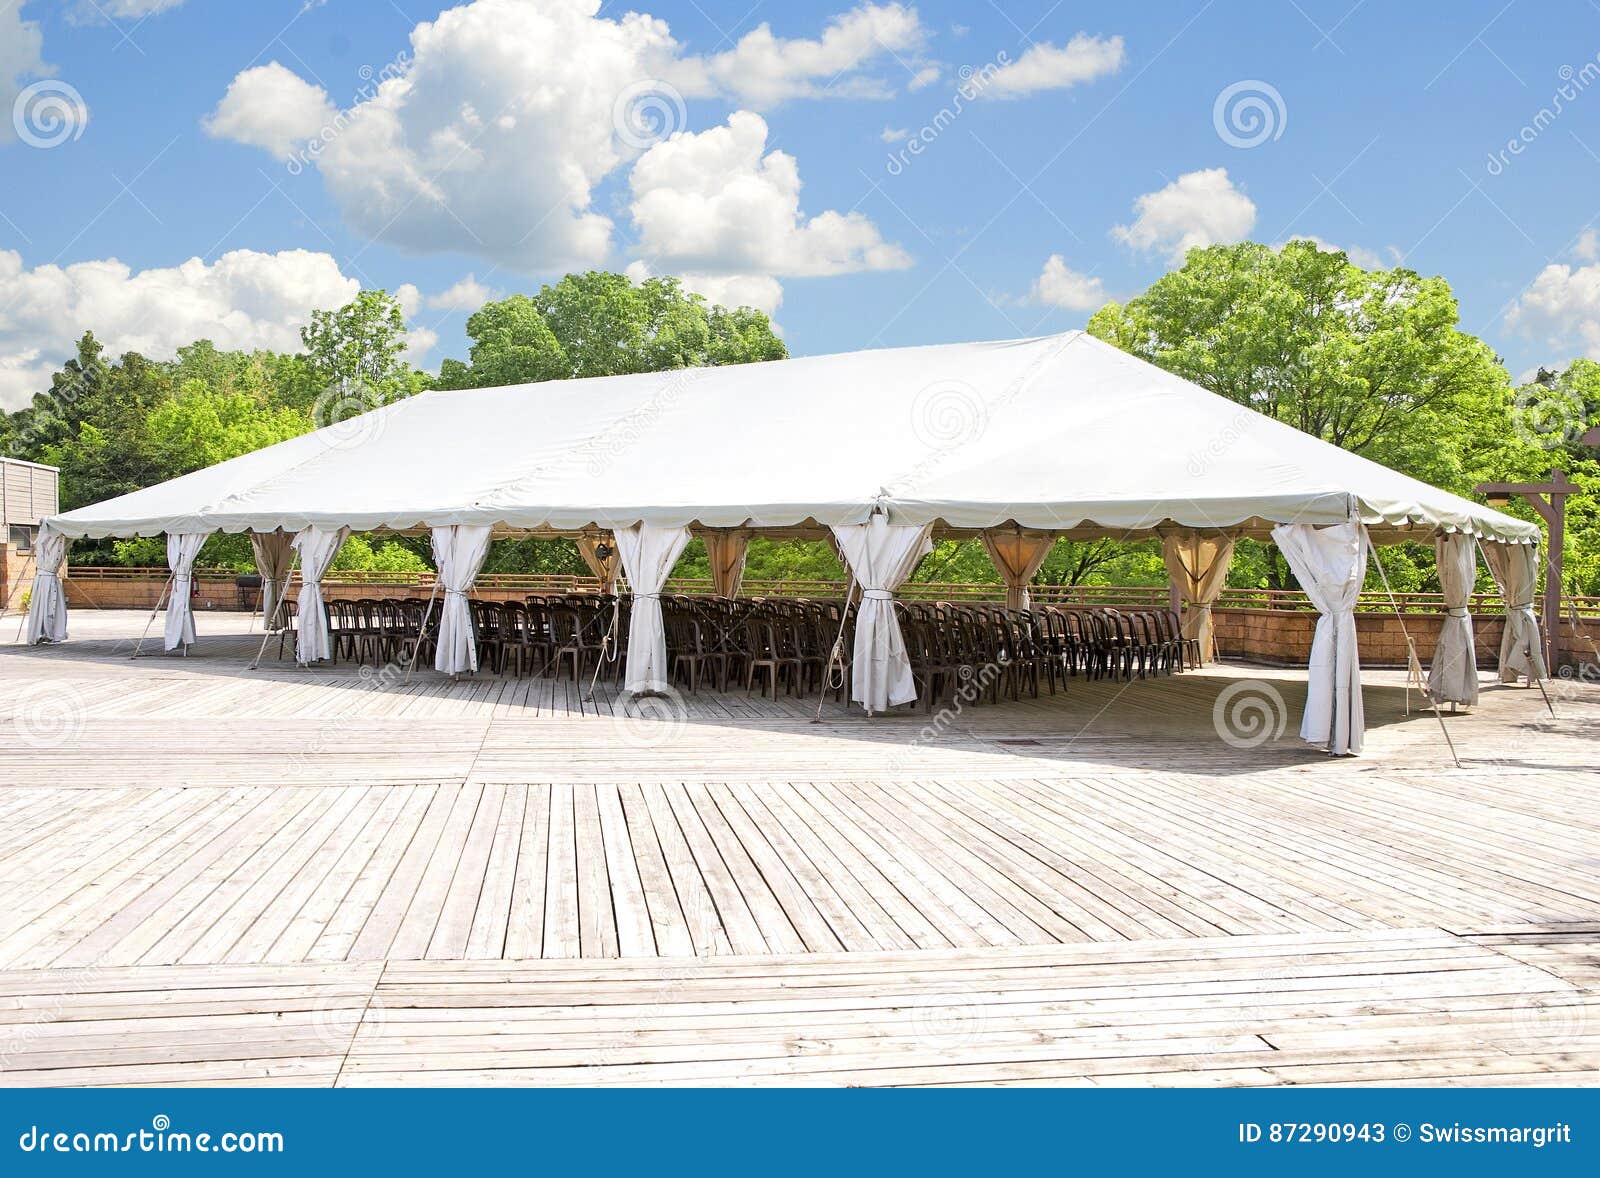 outdoor tent for weddings or other festivity